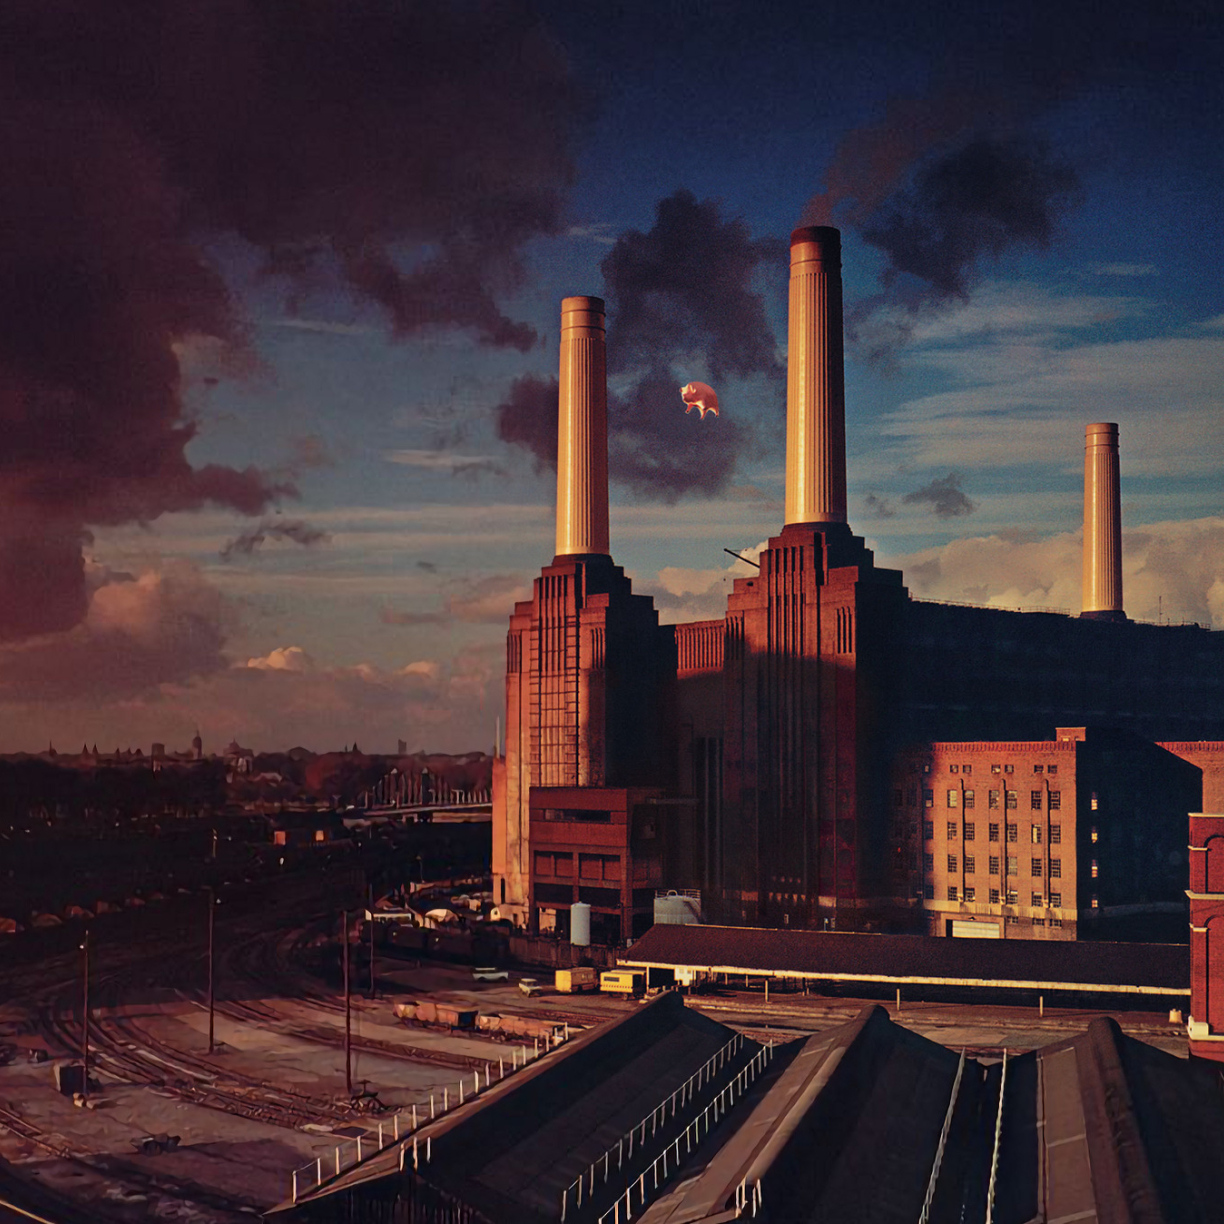 pink floyd hd music videos concerts